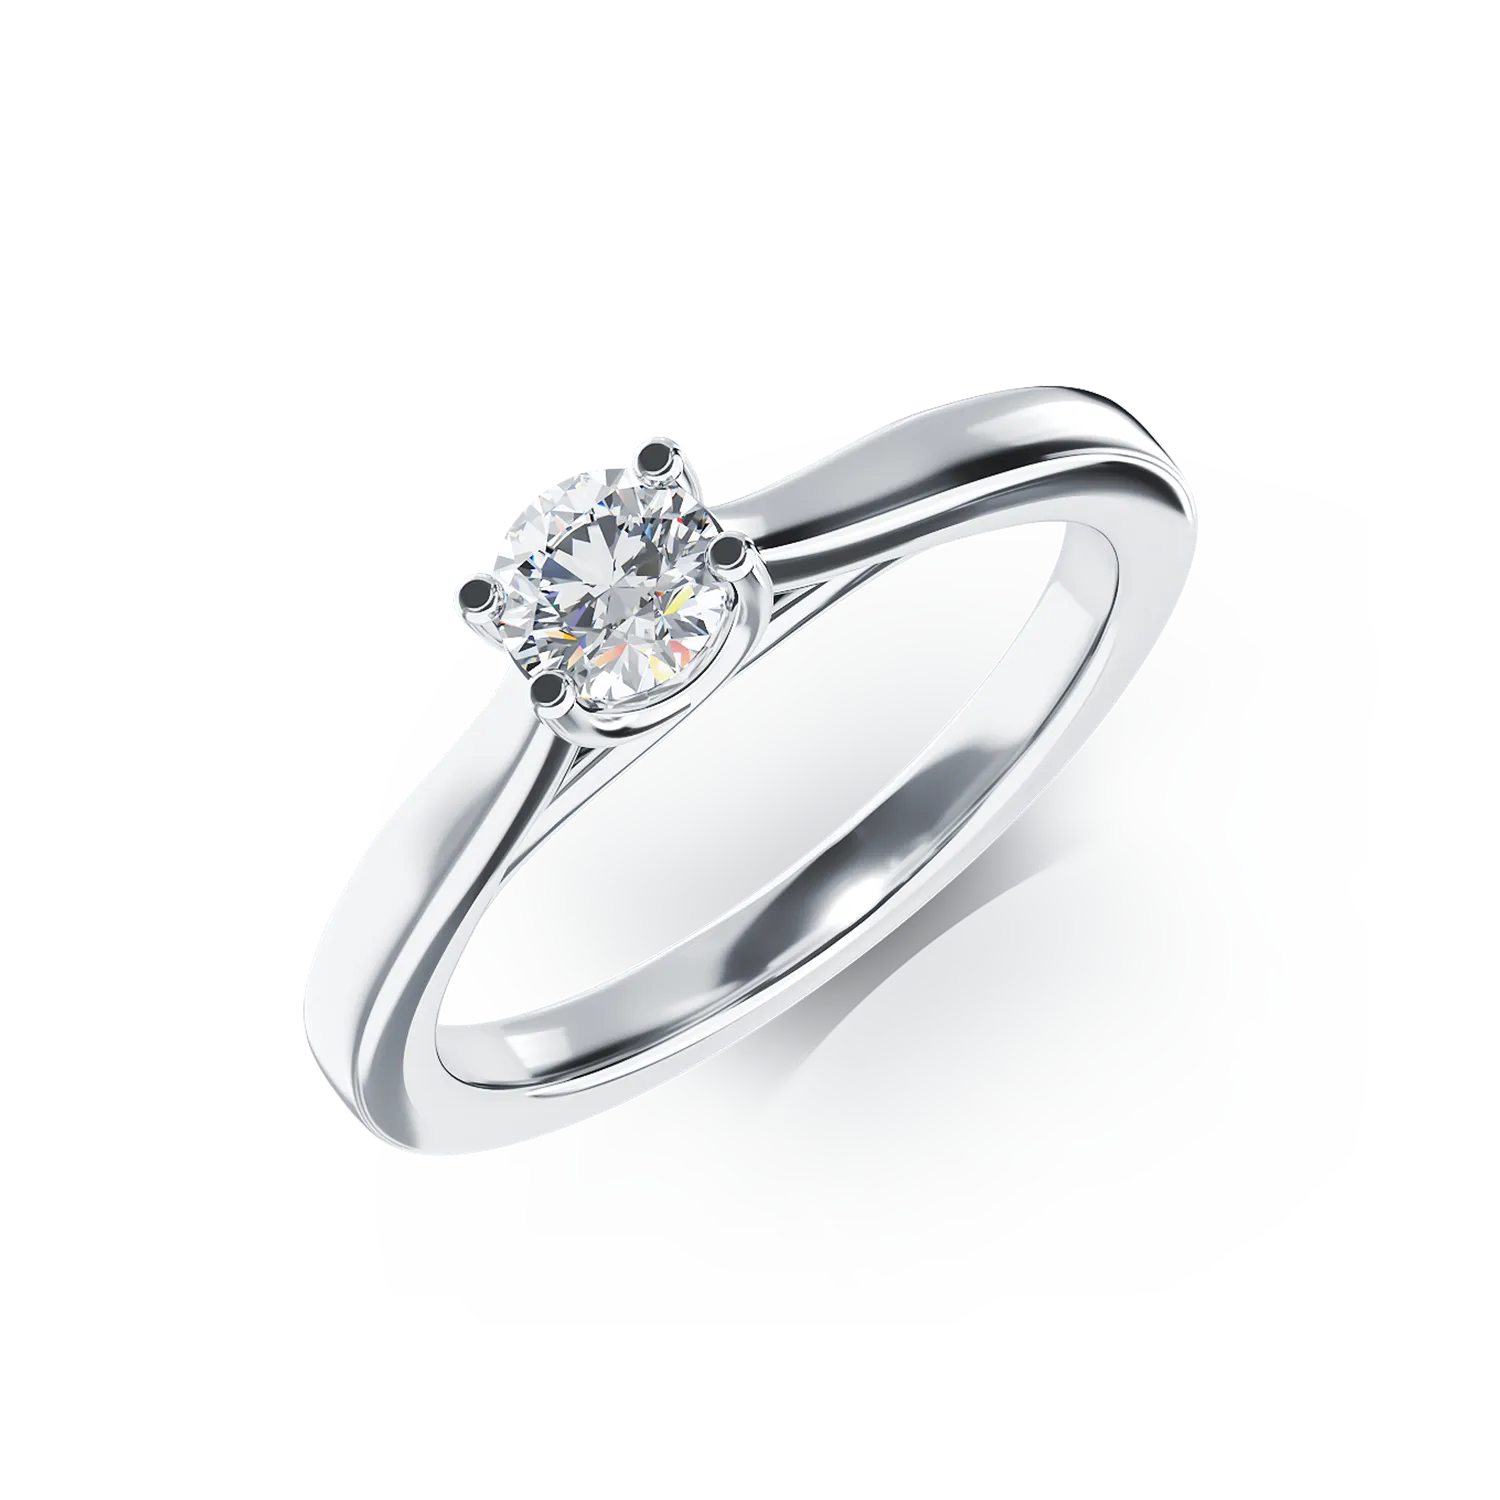 18K white gold engagement ring with a 0.25ct solitaire diamond